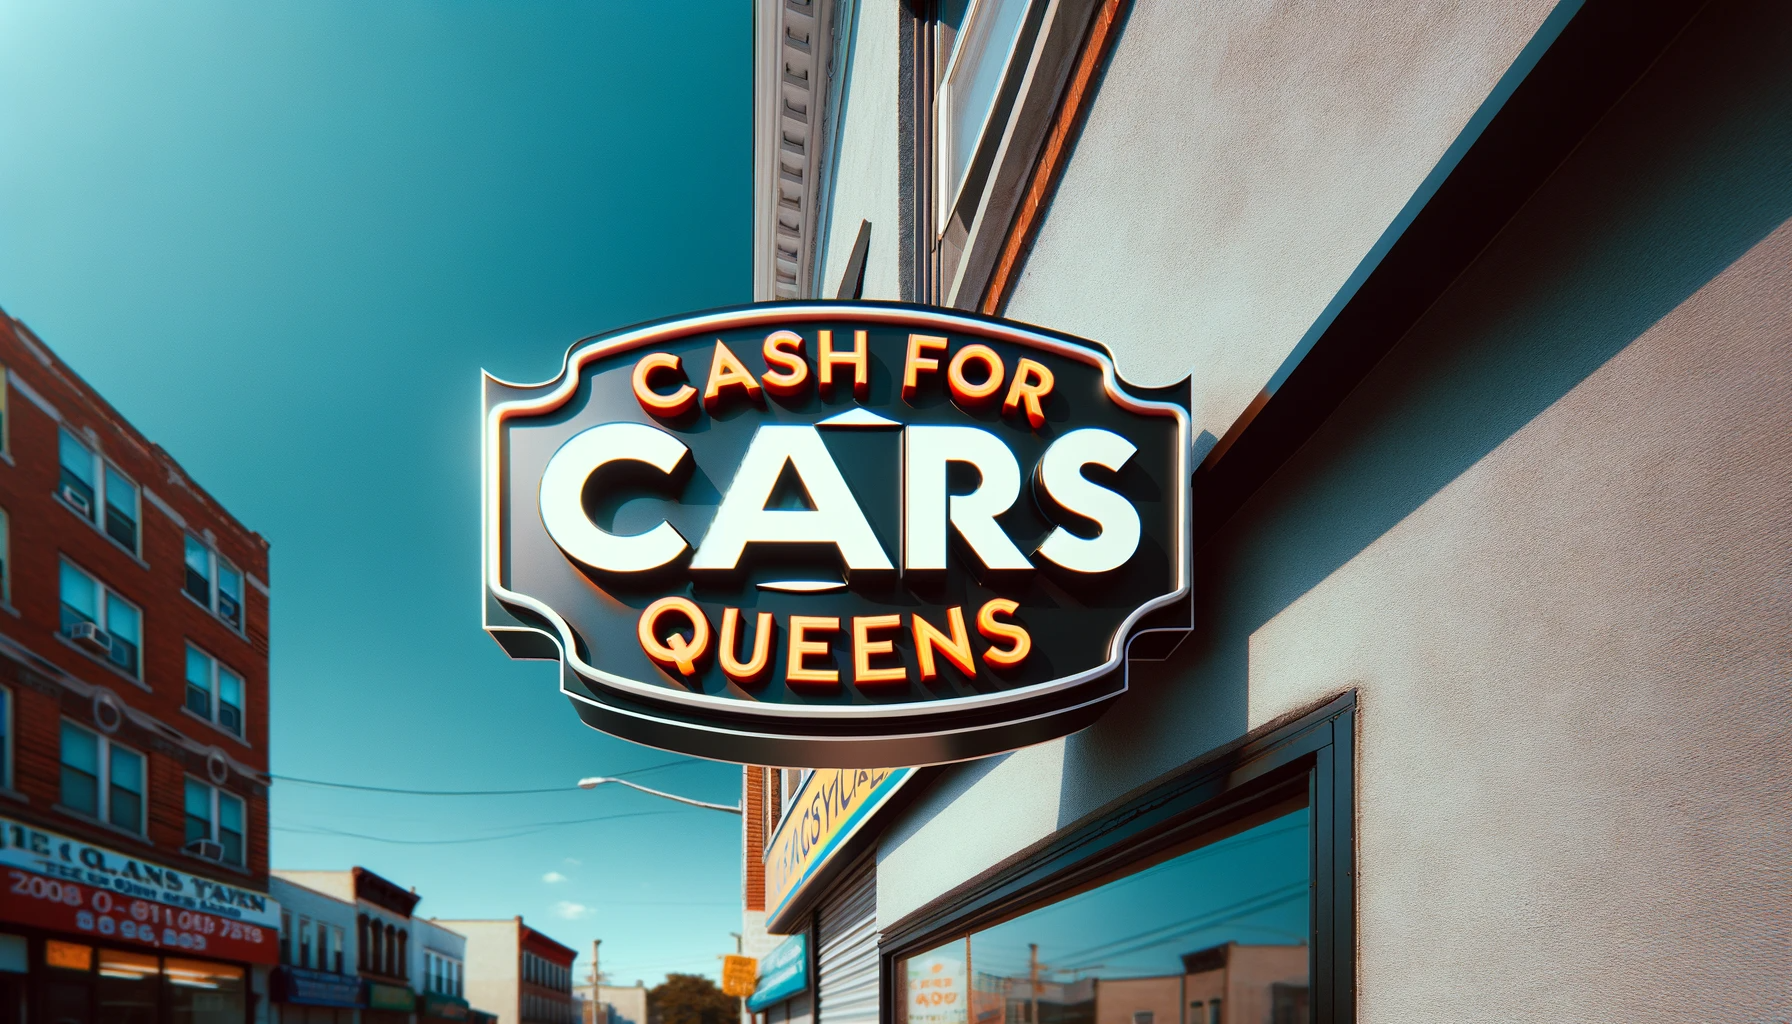 Cash For Cars Queens